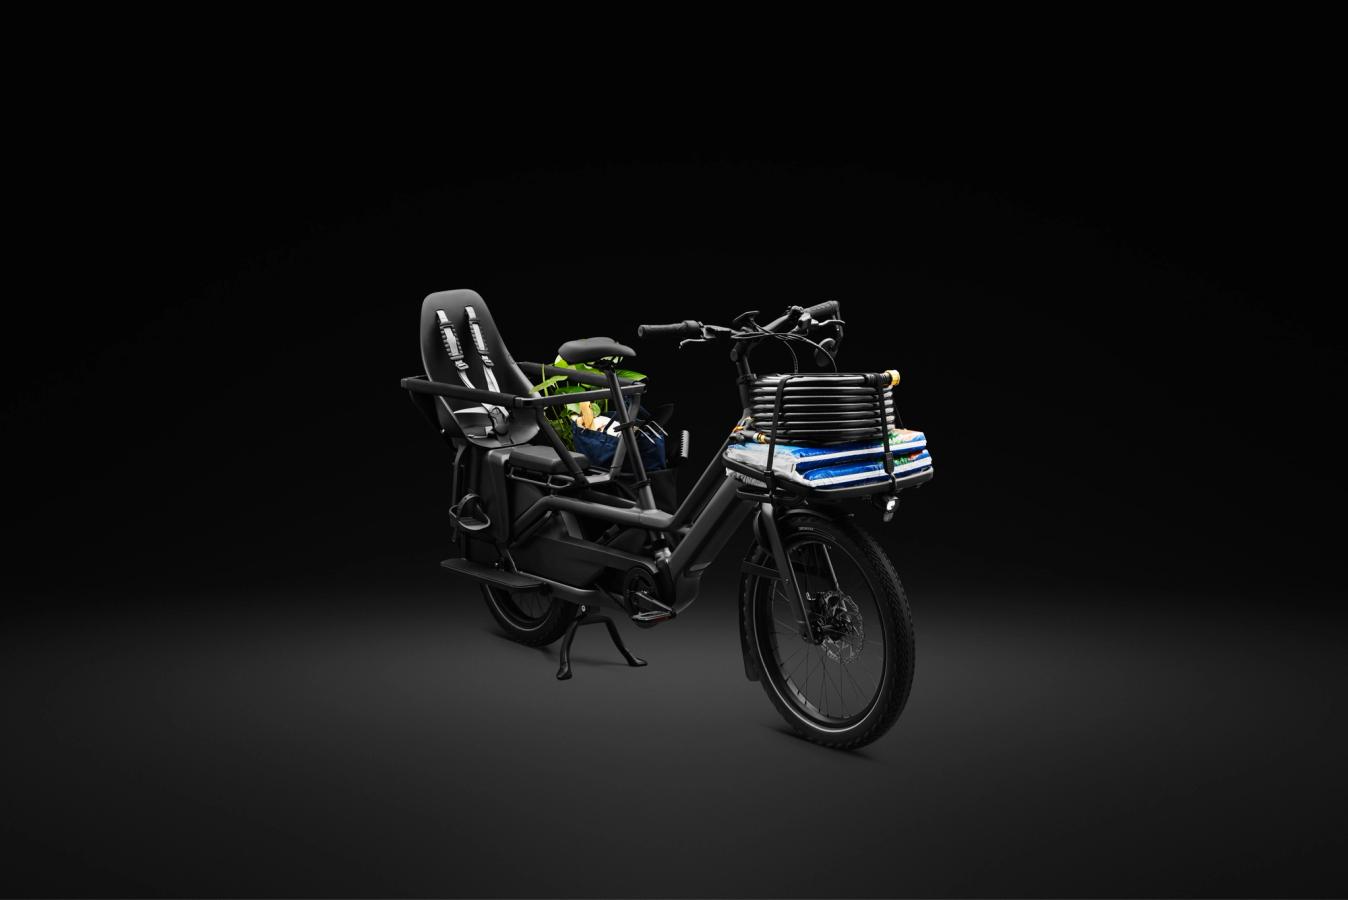 A full range of accessories allows the Turbo Porto to match needs of the rider